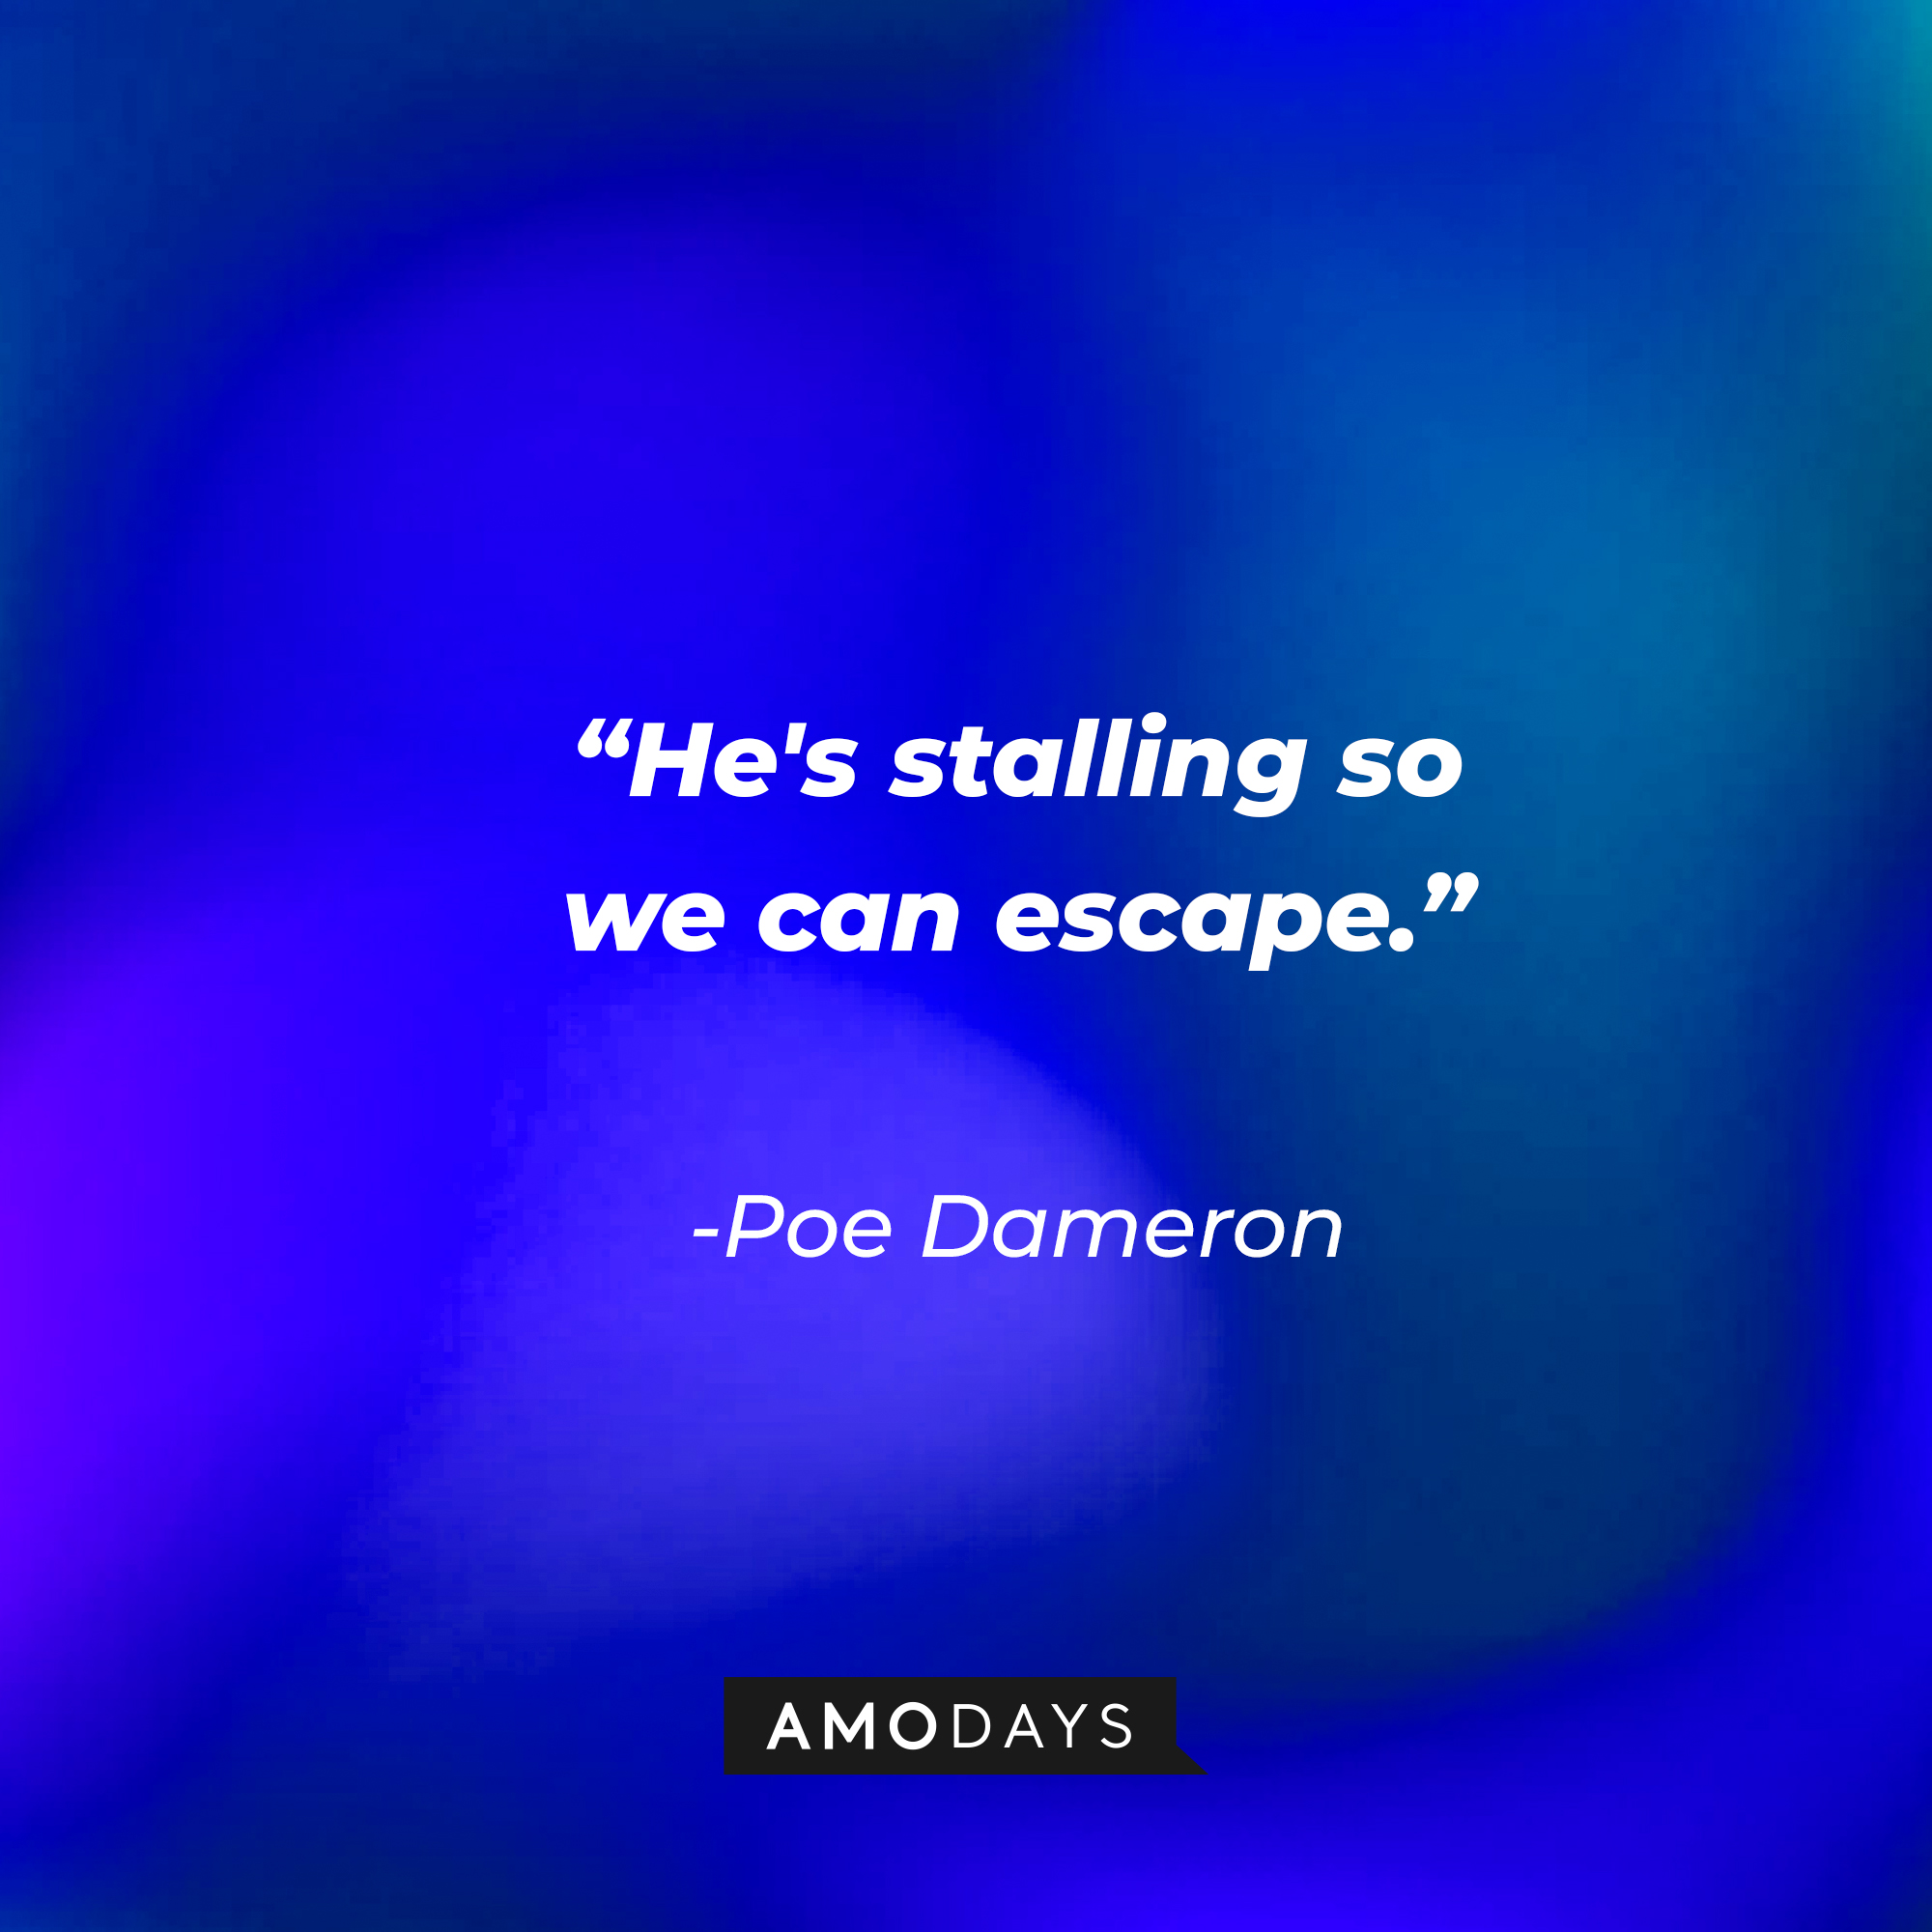 Poe Dameron’s quote: “He's stalling so we can escape.” | Source: AmoDays